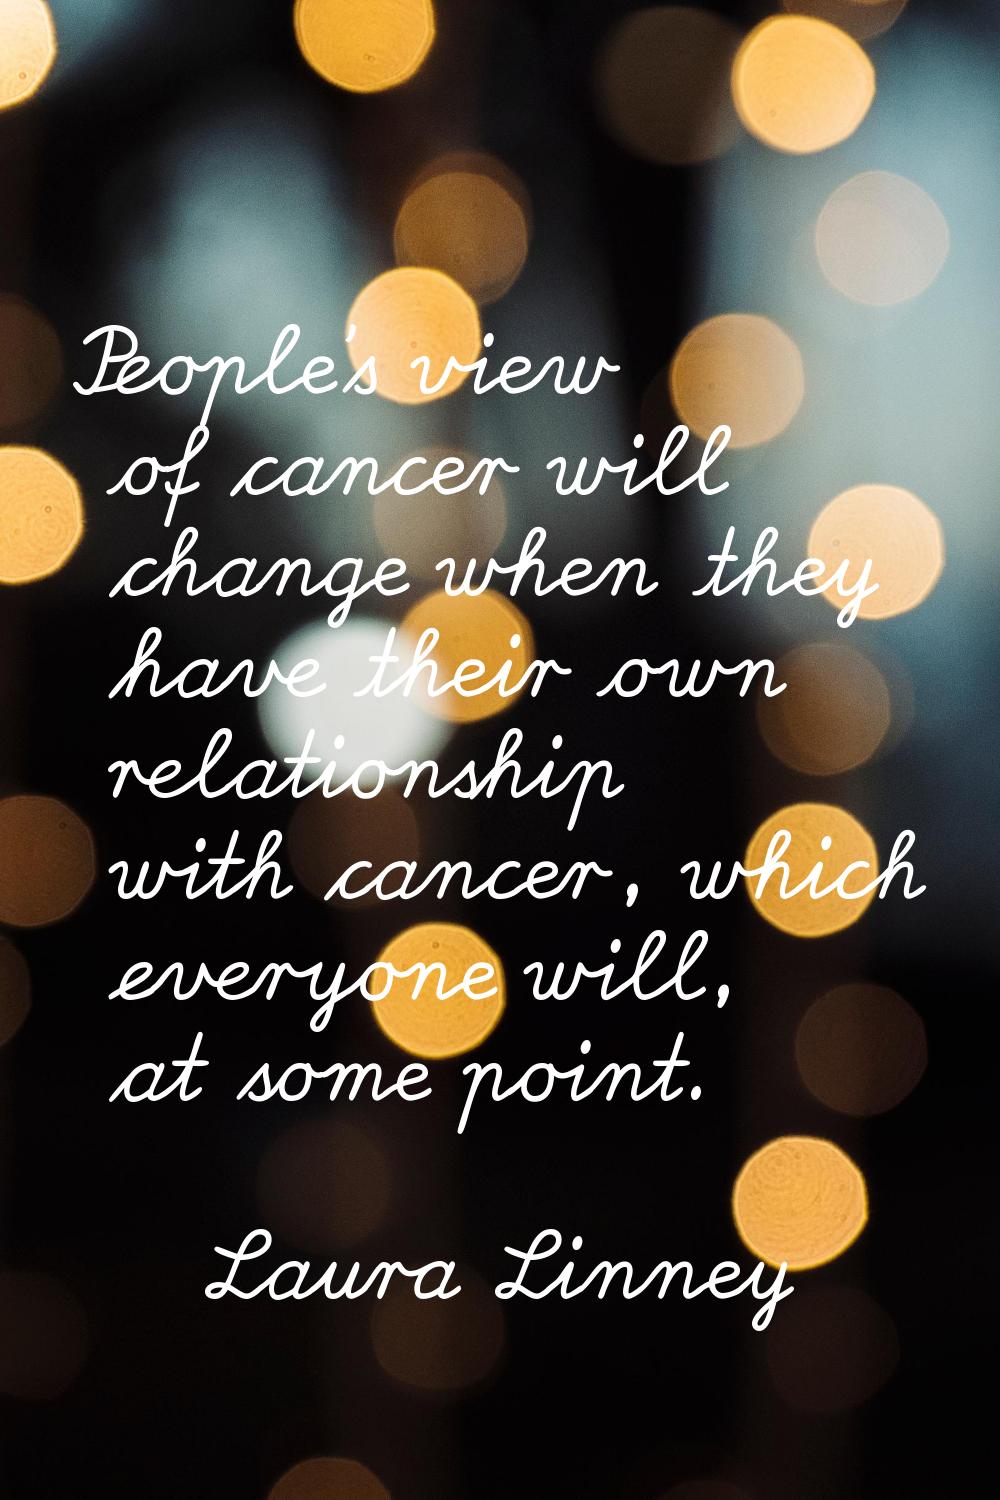 People's view of cancer will change when they have their own relationship with cancer, which everyo